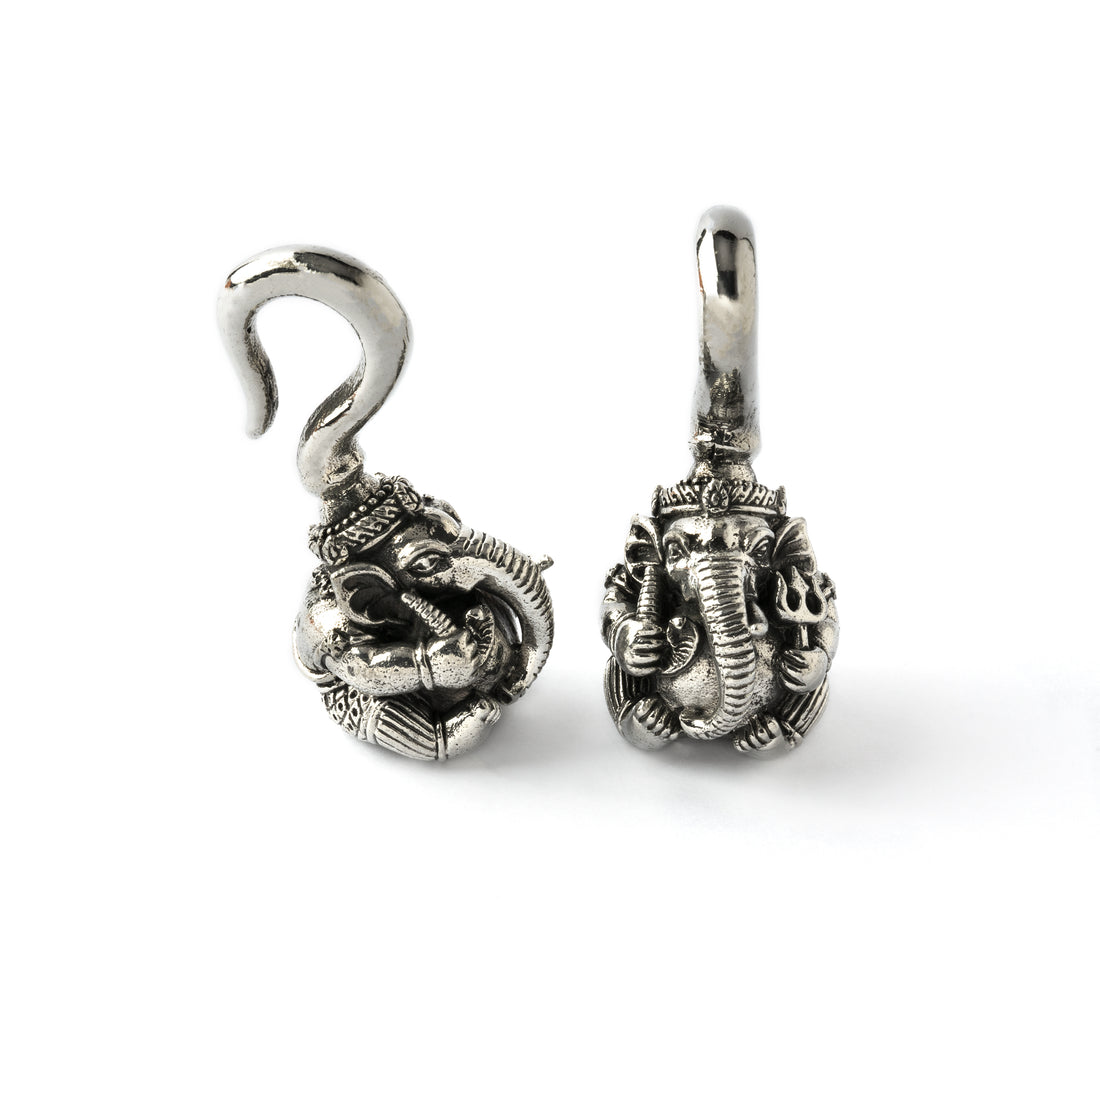 pair of silver brass 3D Ganesh ear weight hangers front and right side view